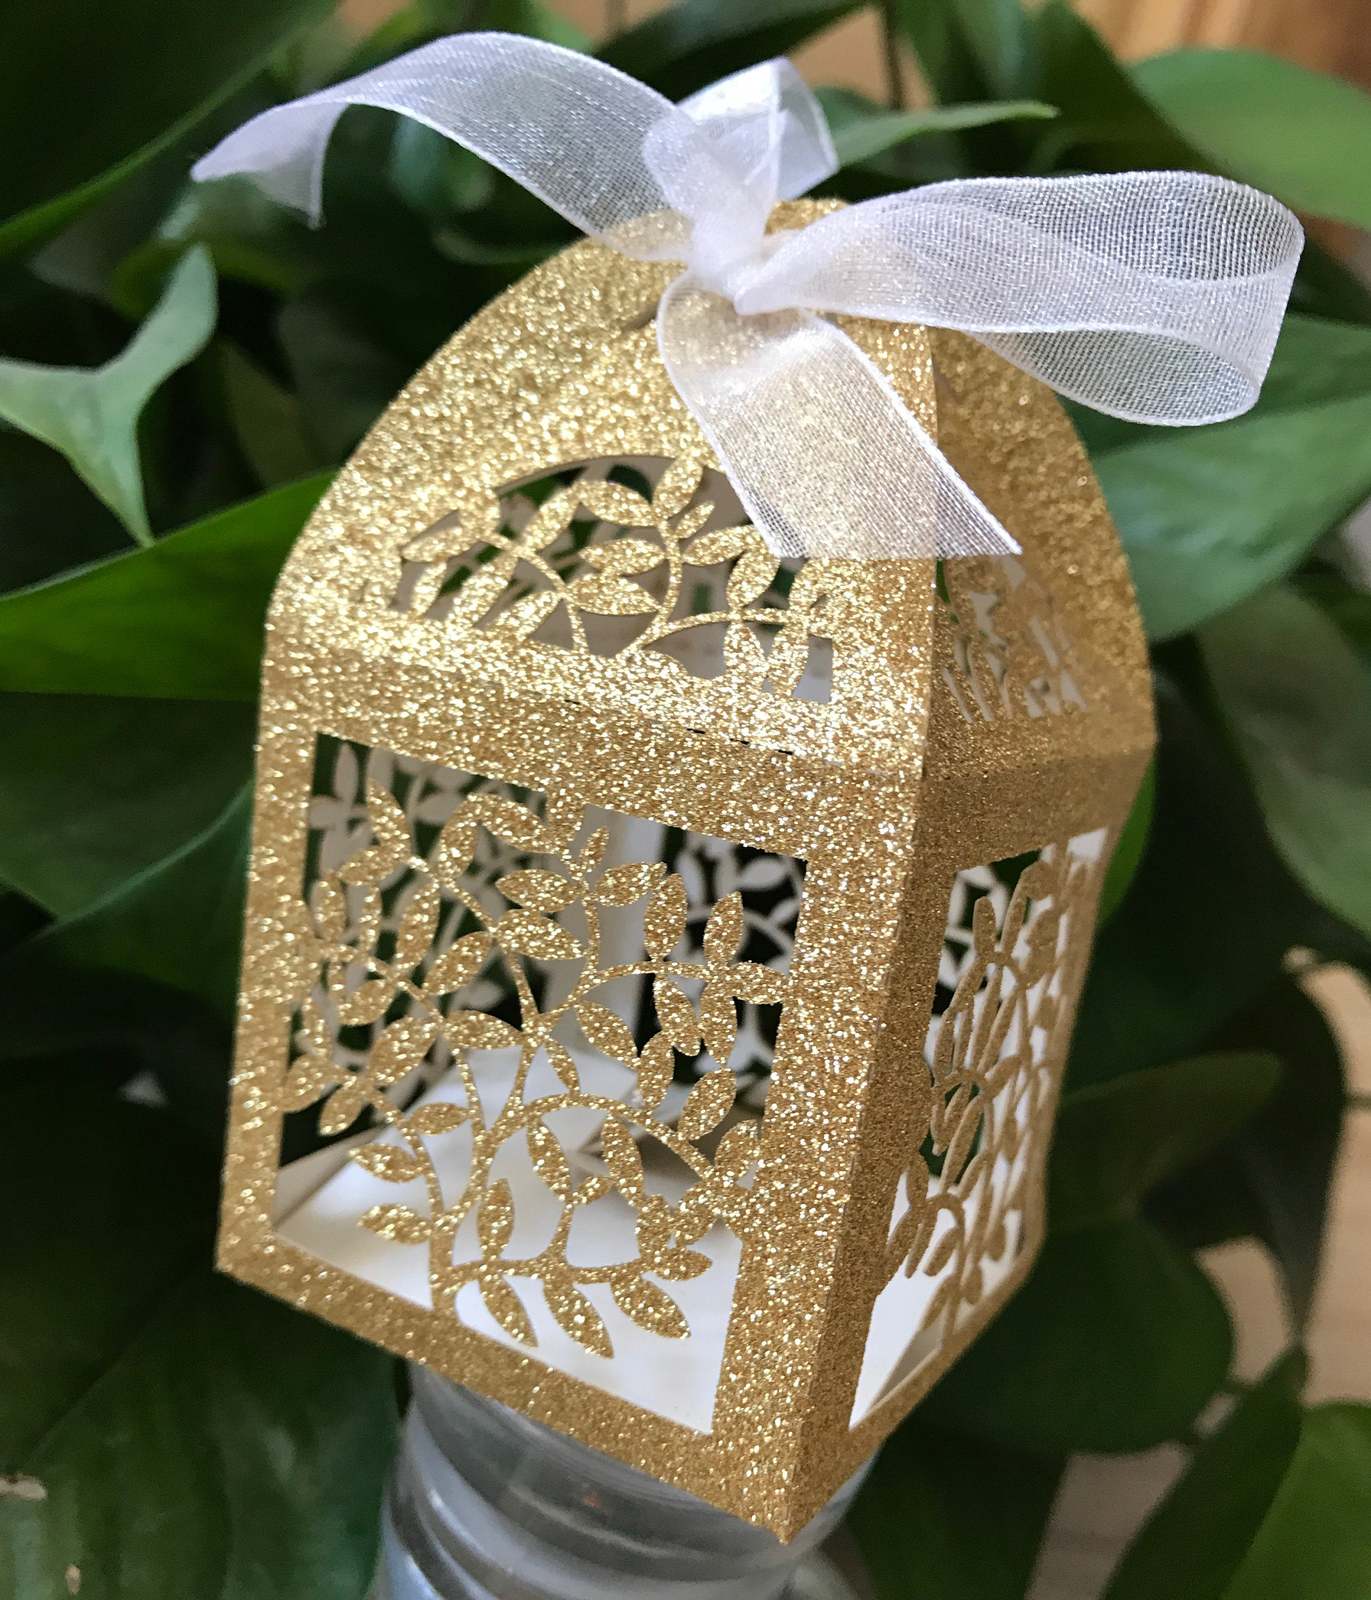 100*Gold Laser Cut Wedding Gift Box,Chocolate Boxes for Engagement Bridal Shower